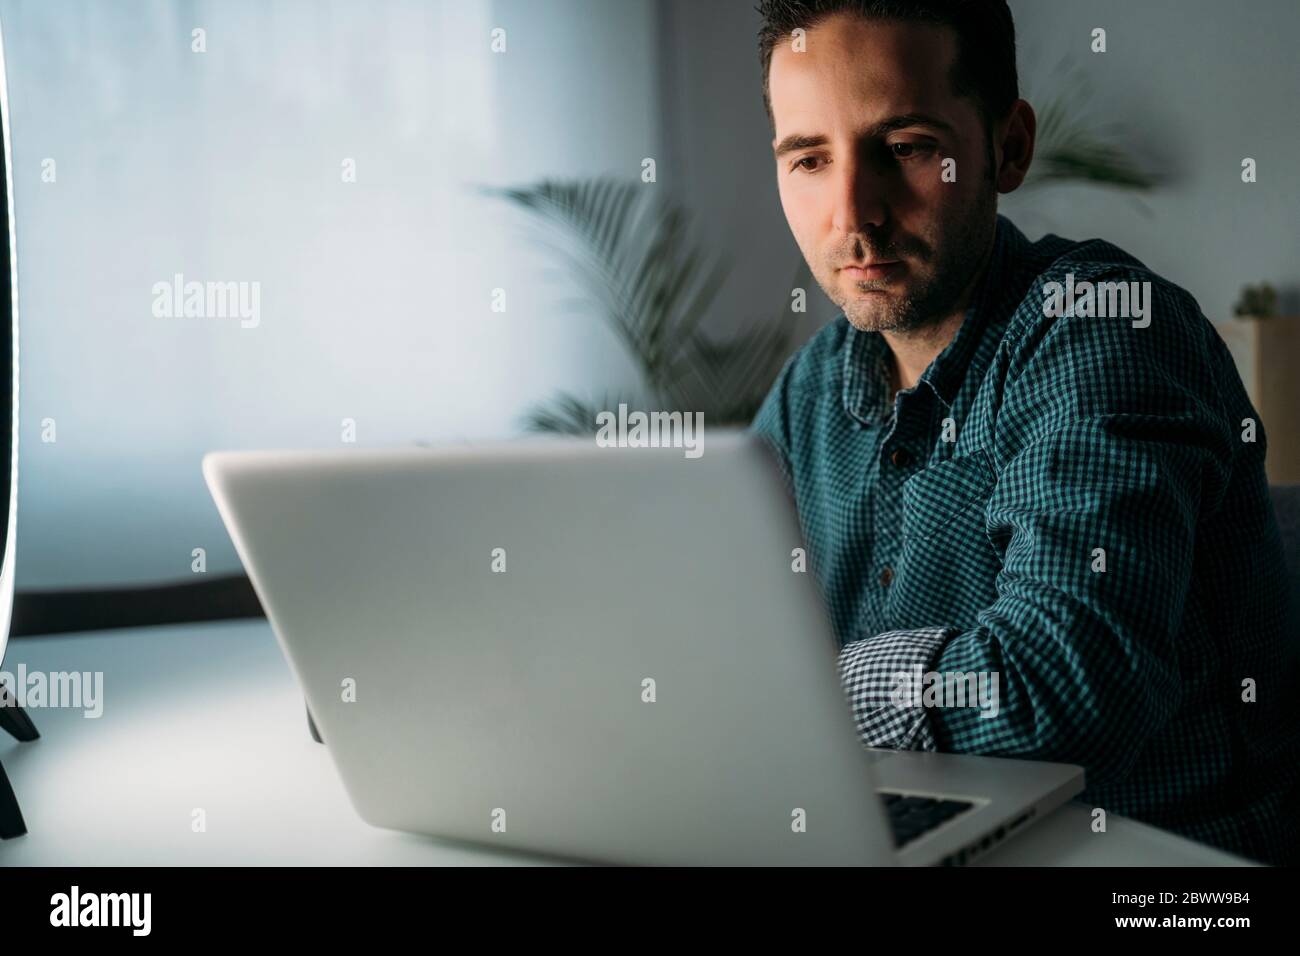 Vlogger using laptop at home Stock Photo